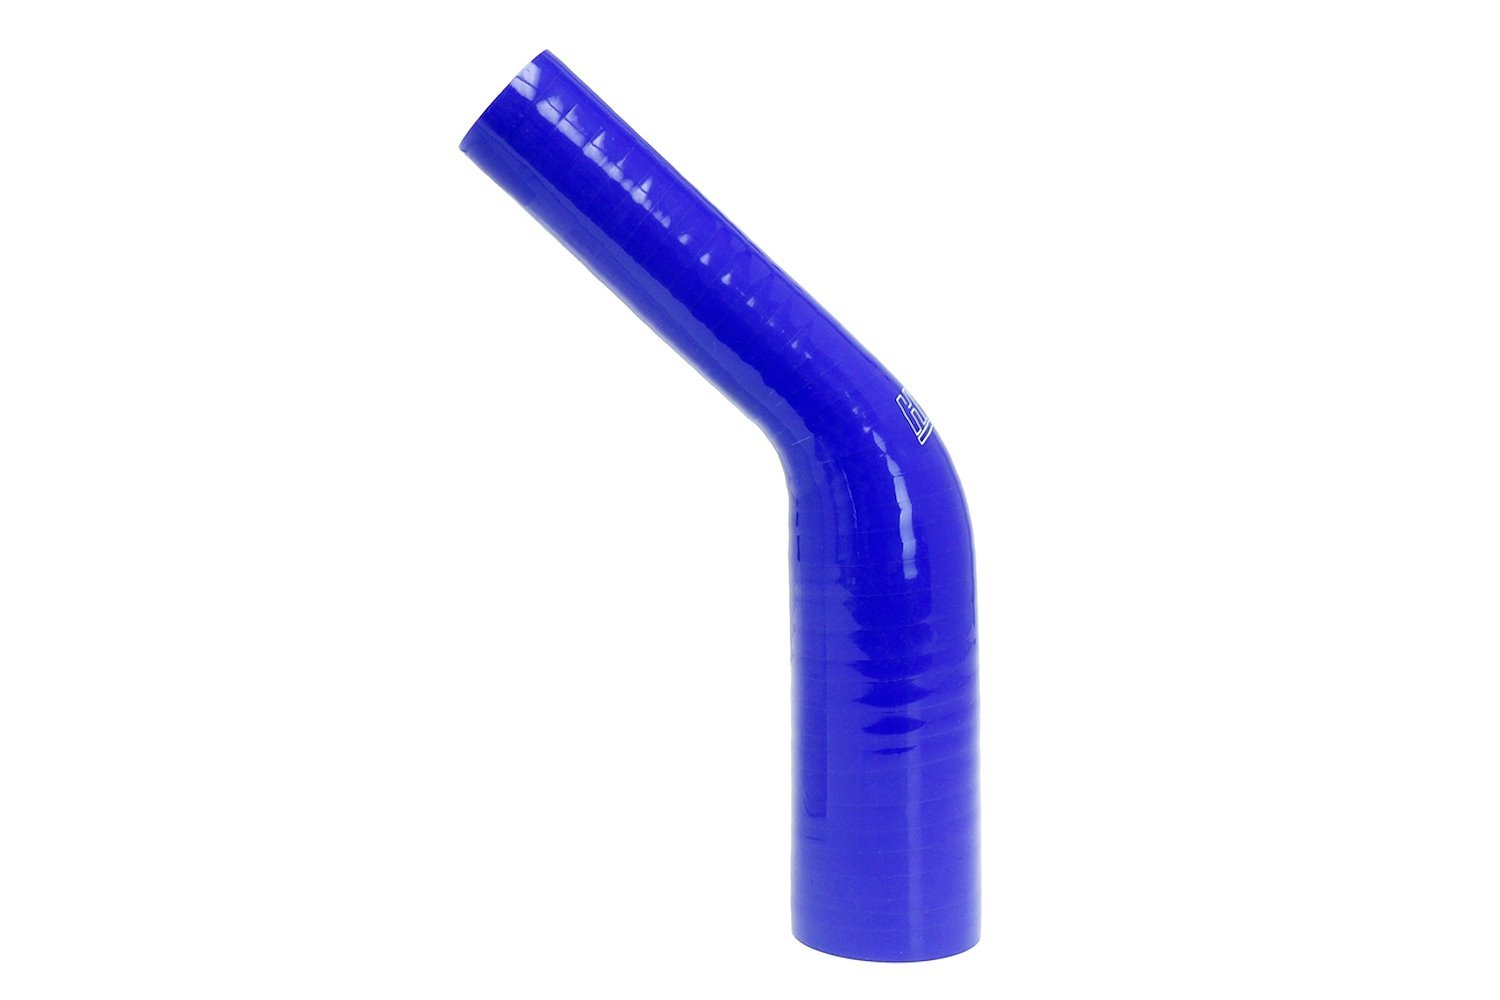 HTSER45-118-138-BLUE Silicone 45-Degree Elbow Hose, High-Temp Reinforced, 1-3/16 in. - 1-3/8 in. ID, Blue